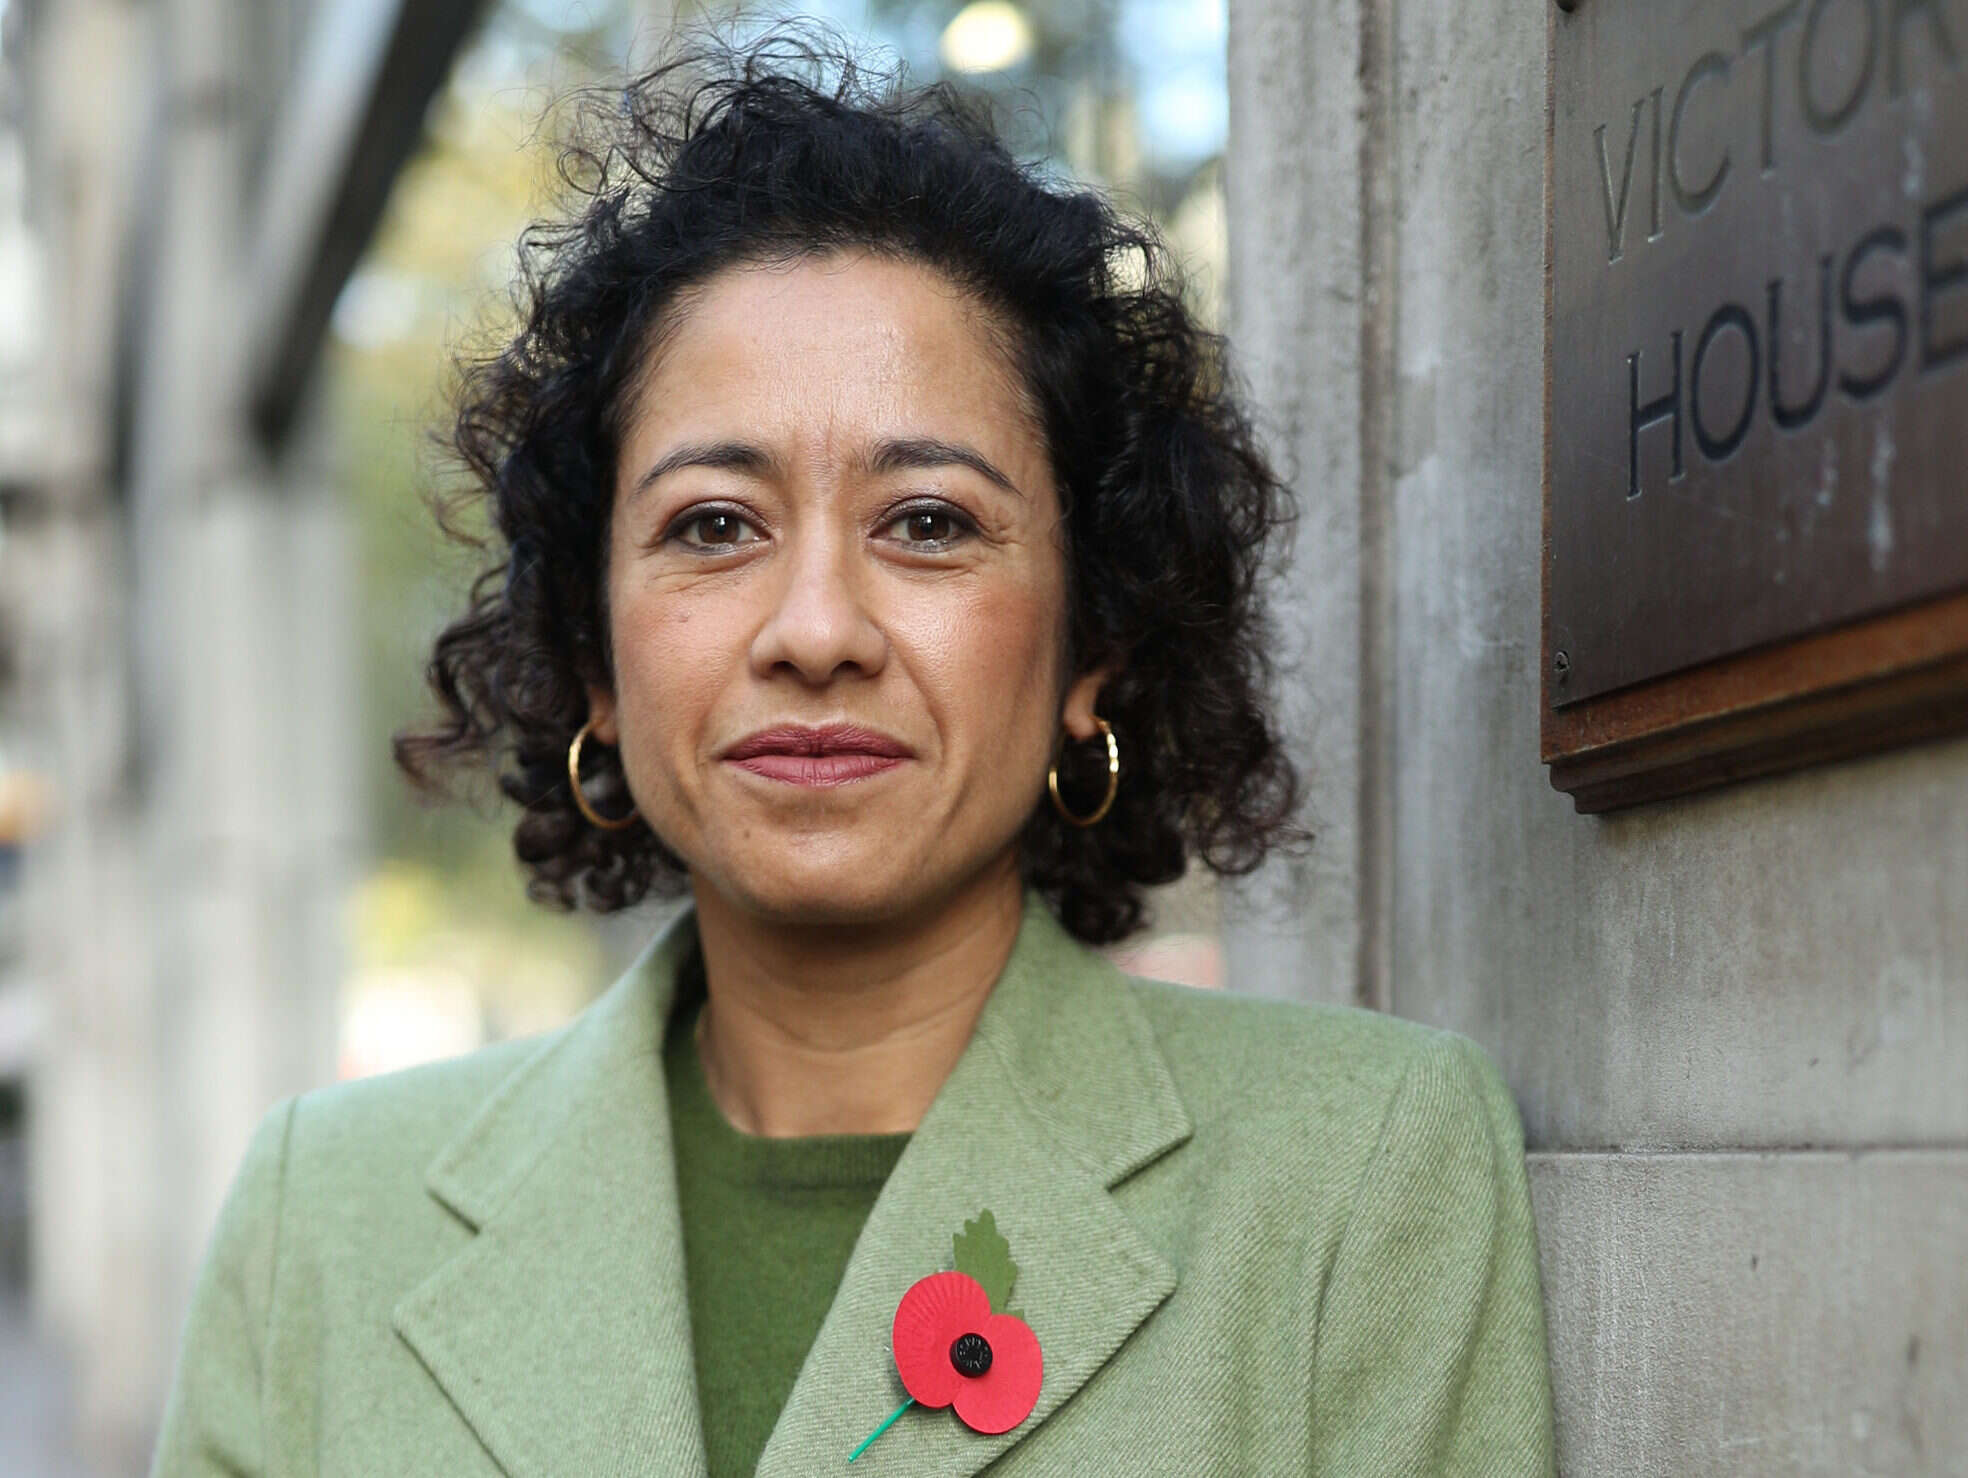 BBC 'conflating' factual and entertainment programming, says lawyer in Samira Ahmed equal pay case